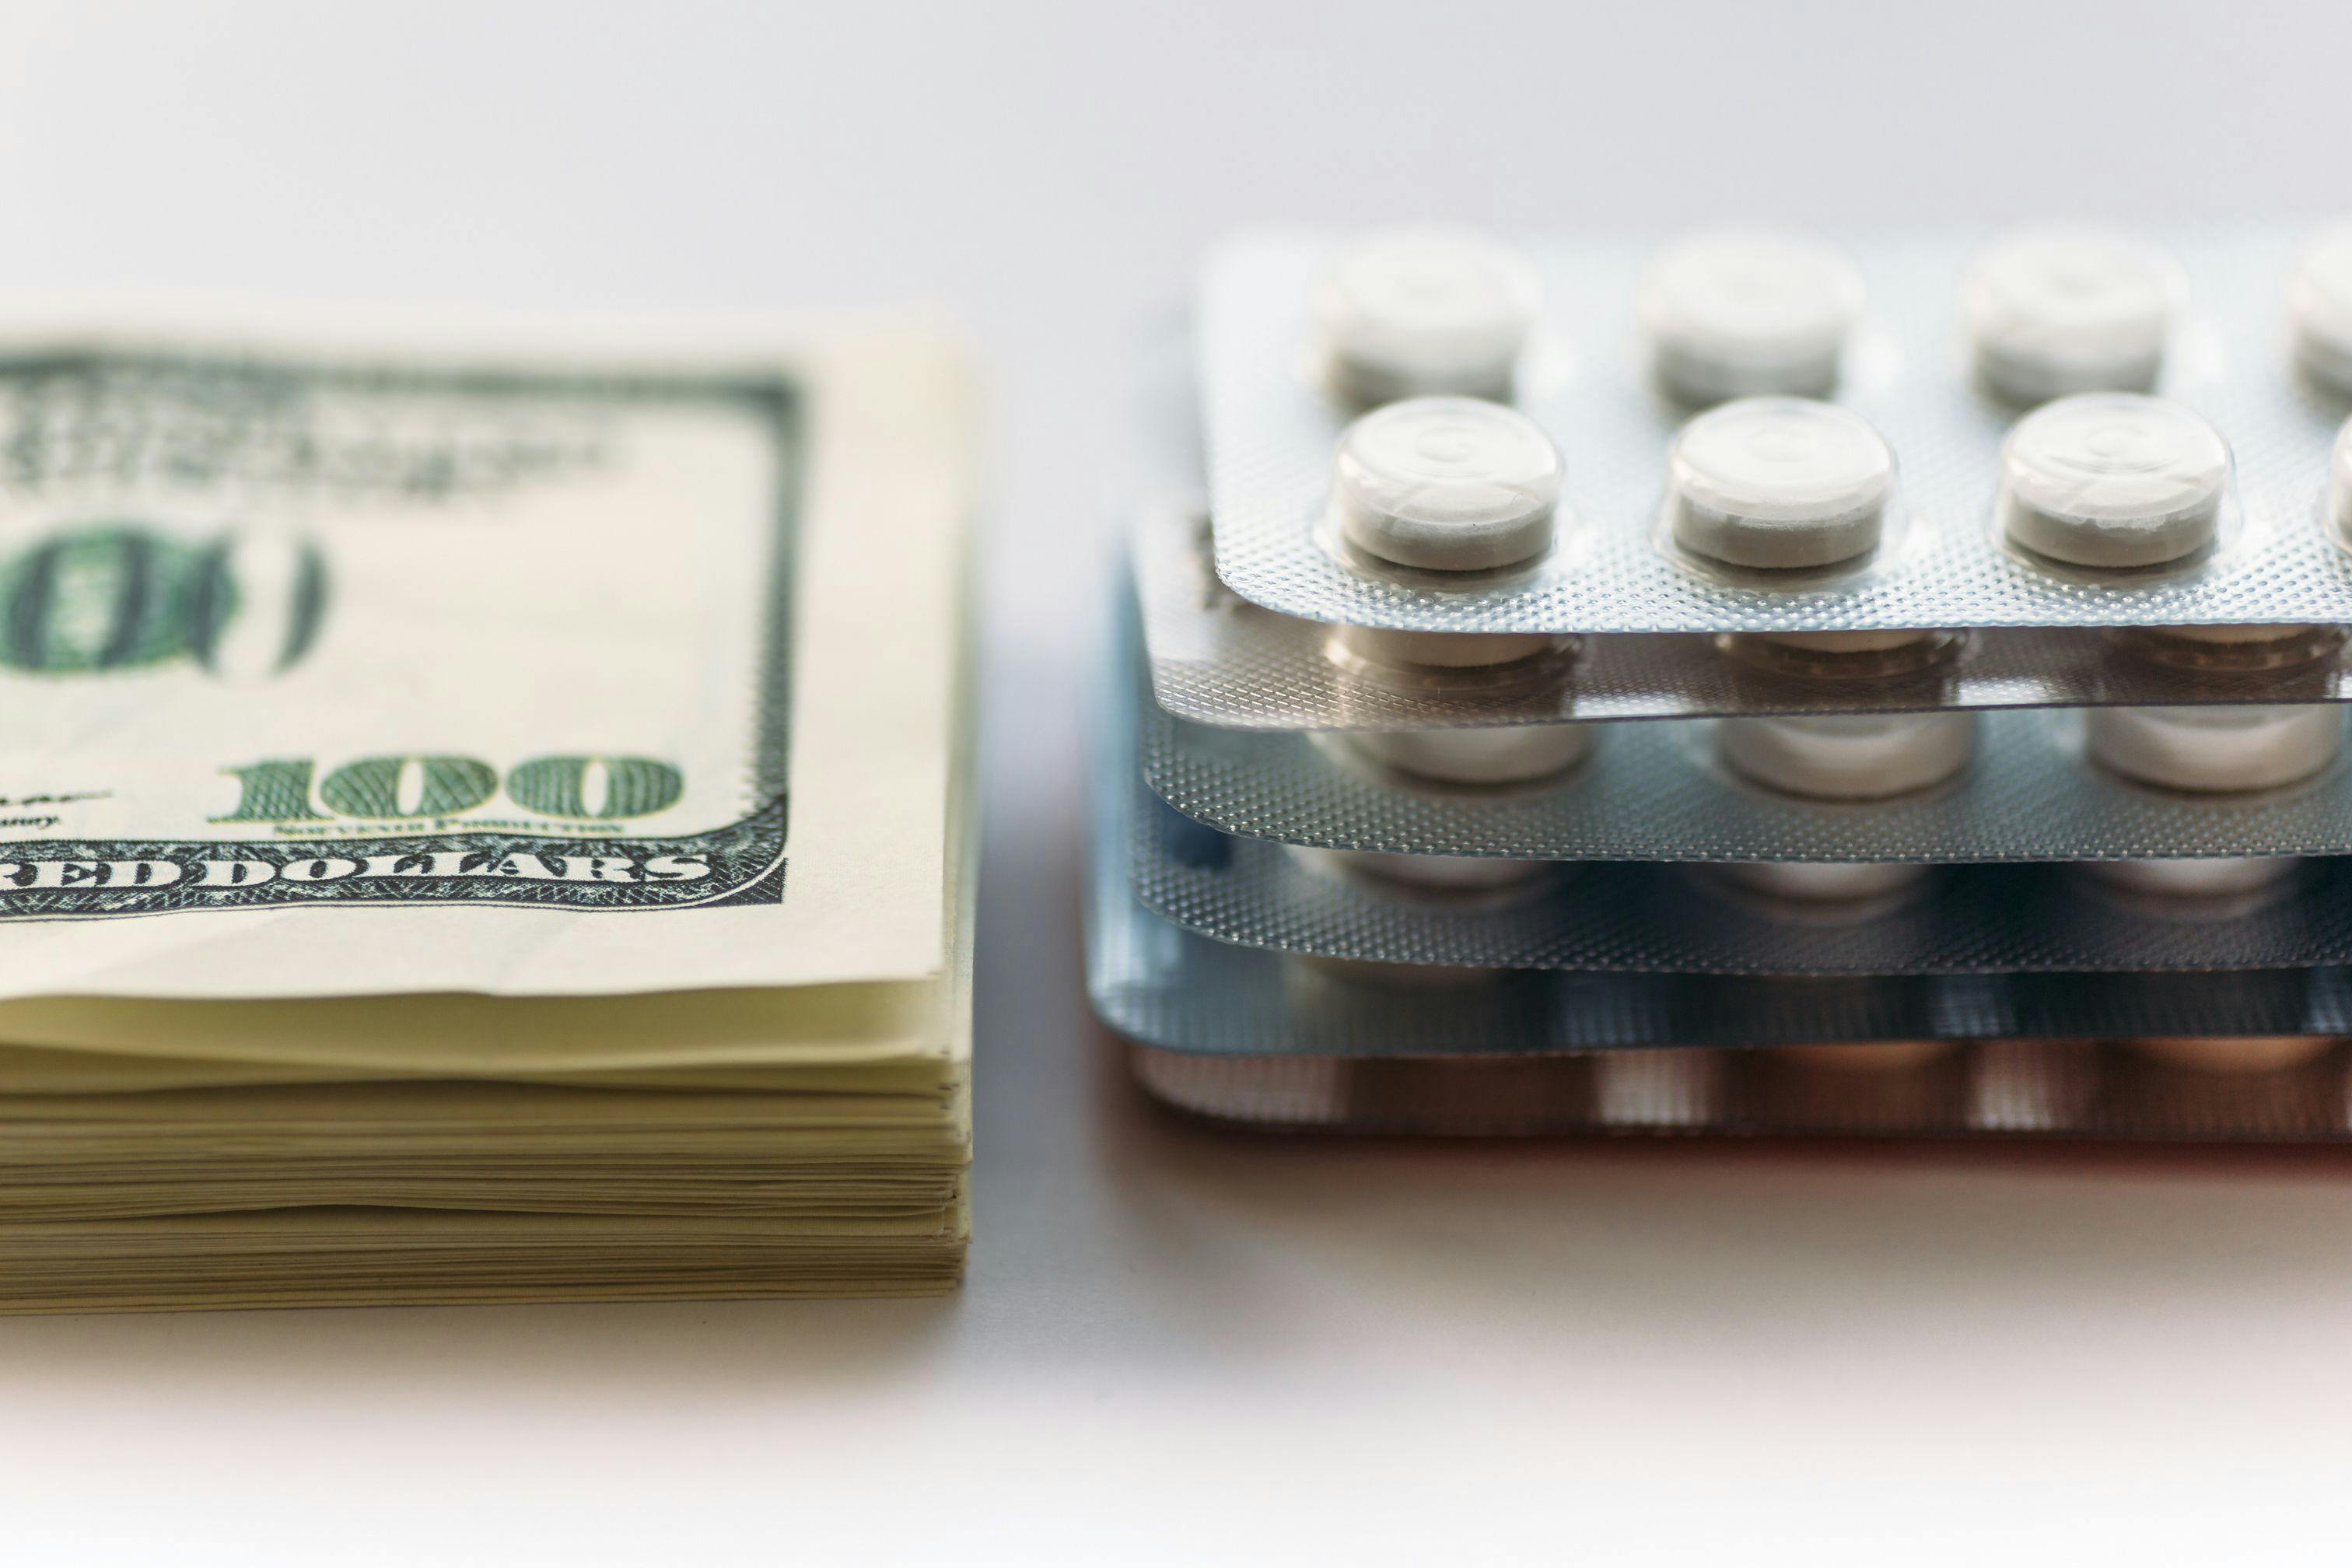 Bundle of money and pack of medication tablets or drug pills, close-up. Expensive health care concept